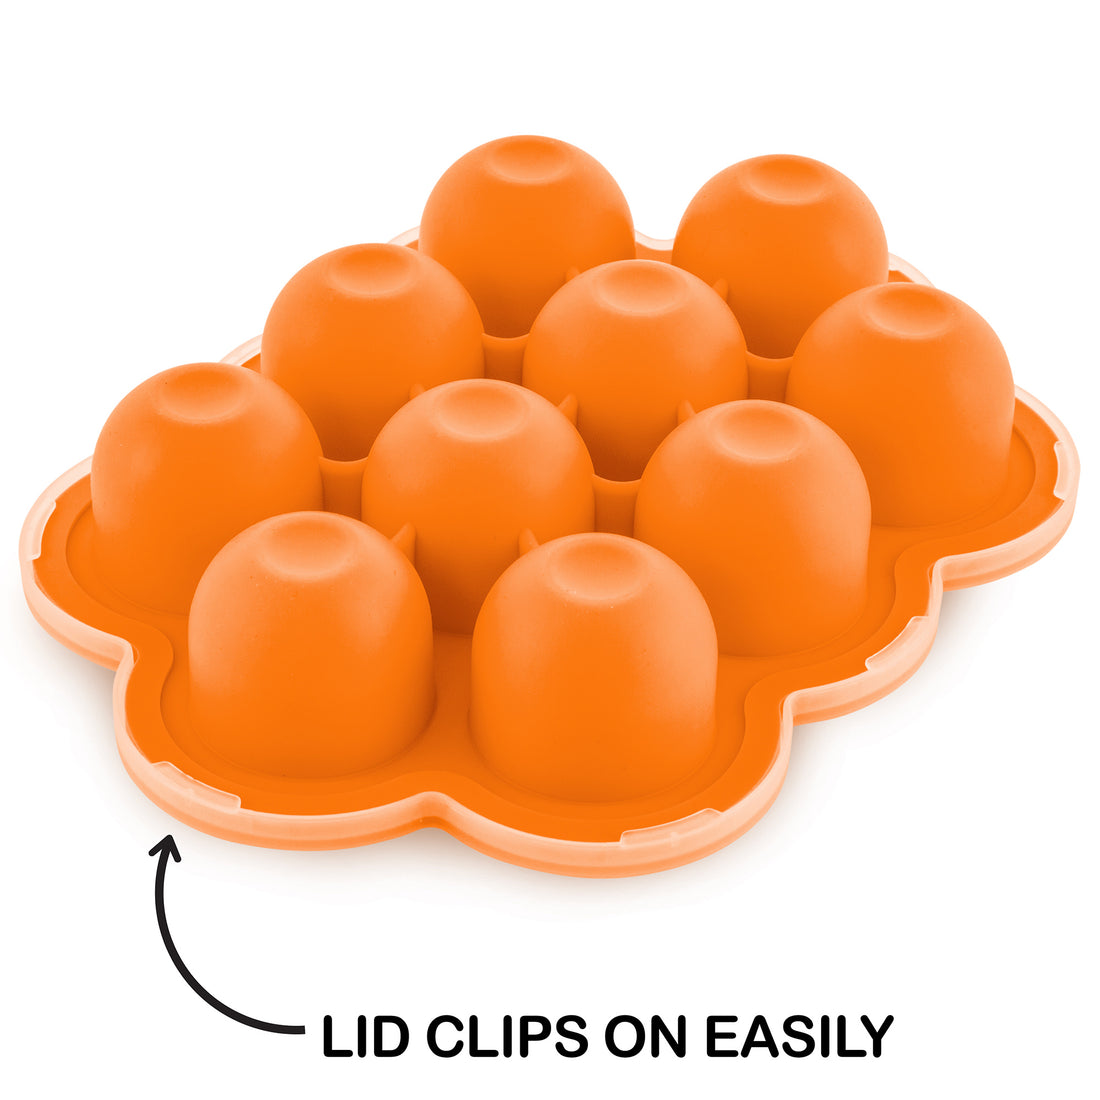 BEABA Multiportions Silicone Baby Food Tray / Container (Orange)